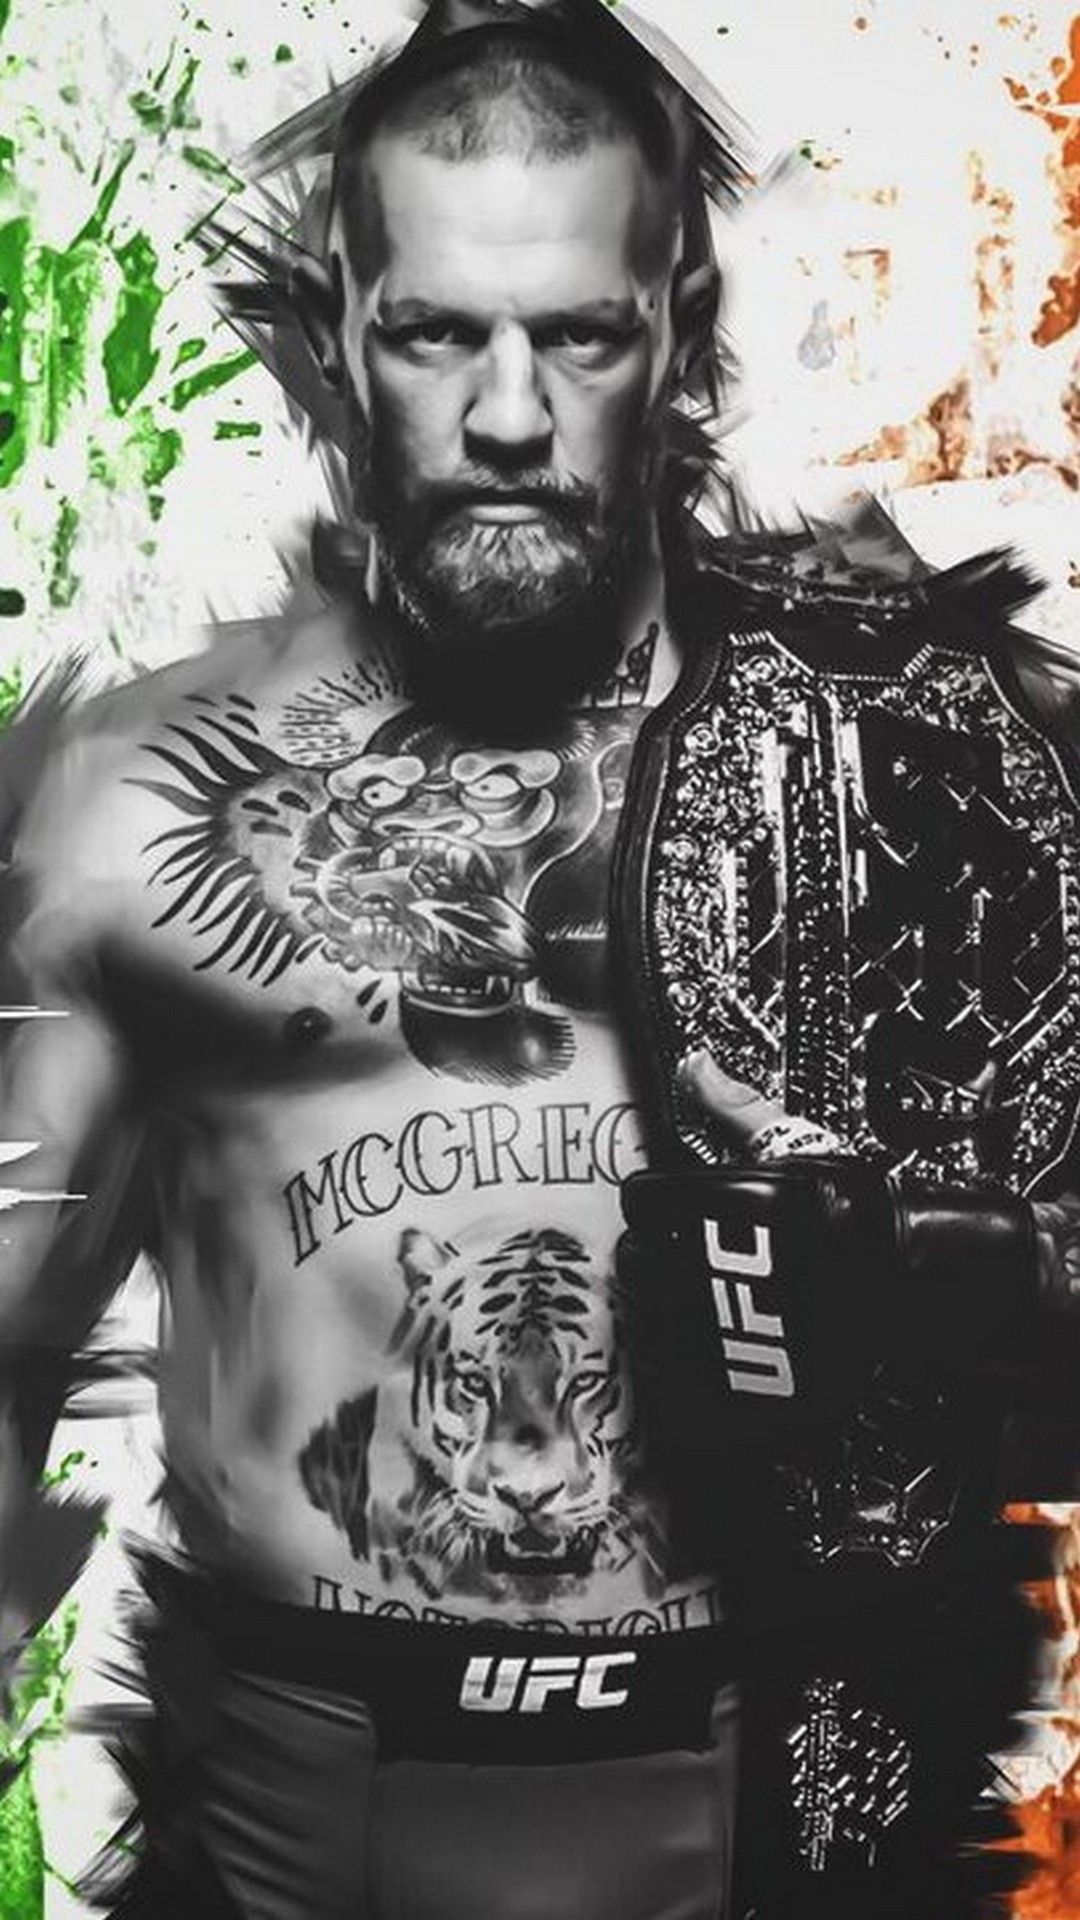 Conor Mcgregor Wallpaper by Unwitheredband26 on DeviantArt